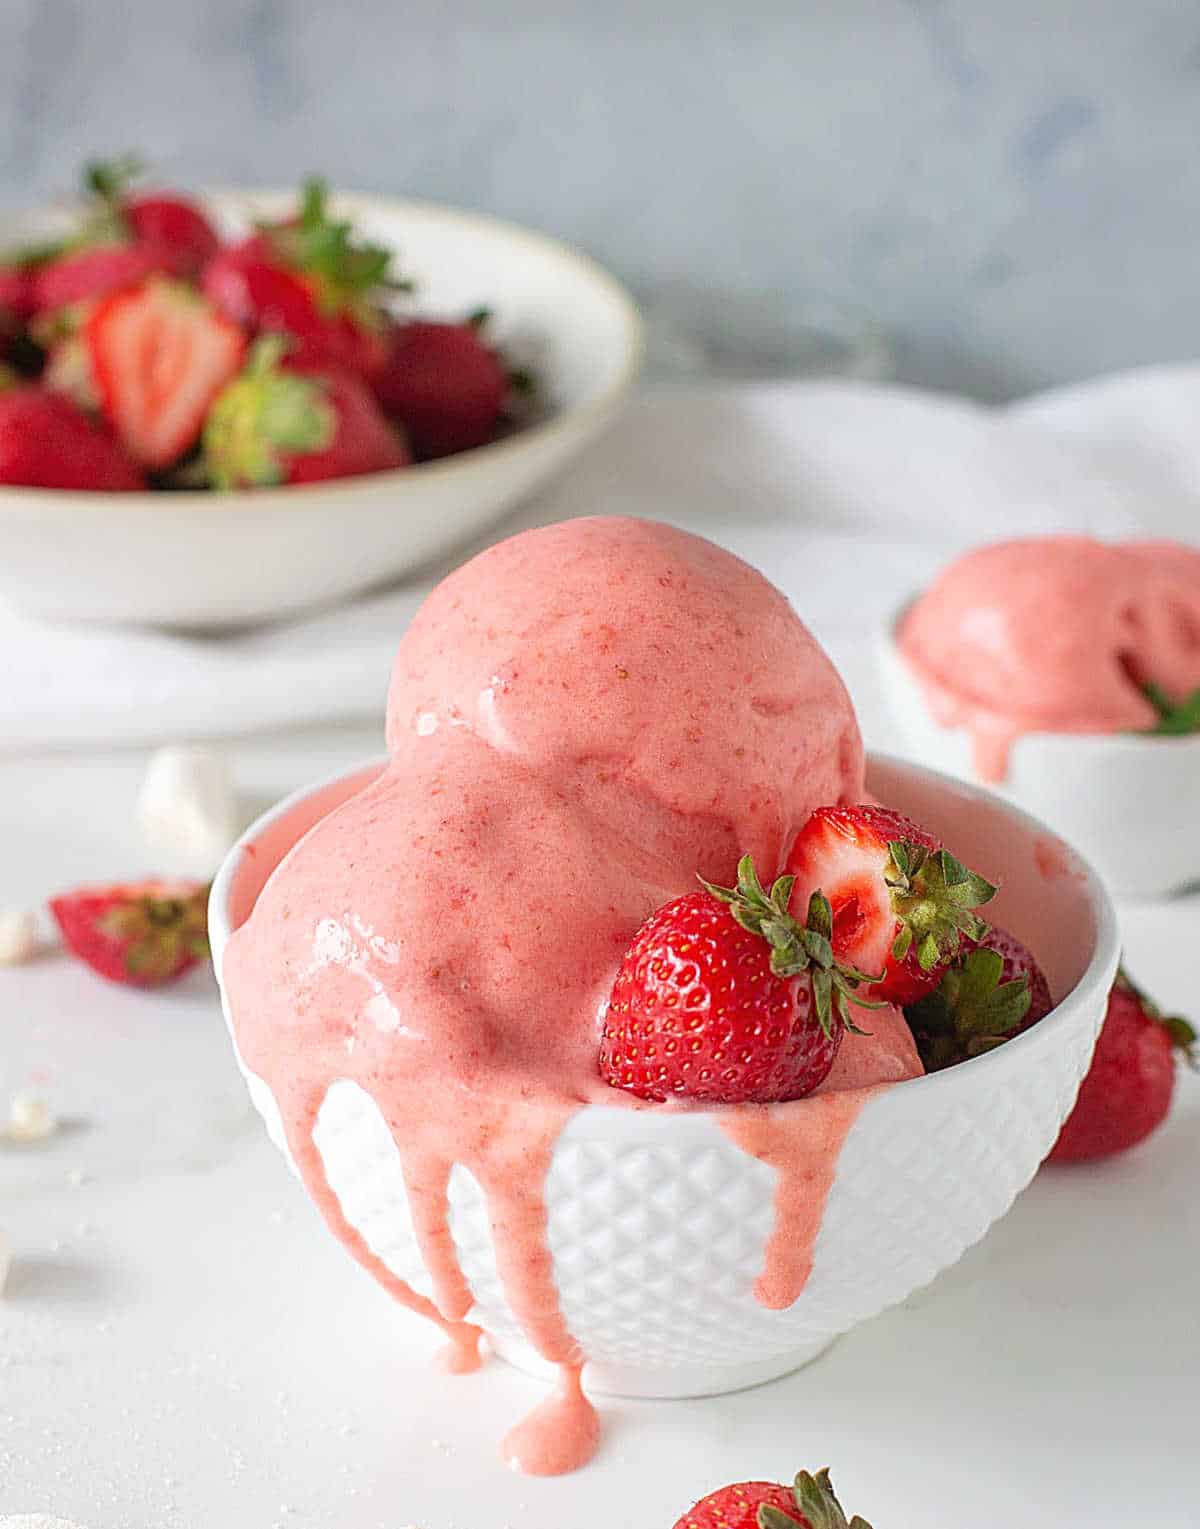 Dripping strawberry ice cream scoops in a white bowl, scattered berries, white surface, grey background.